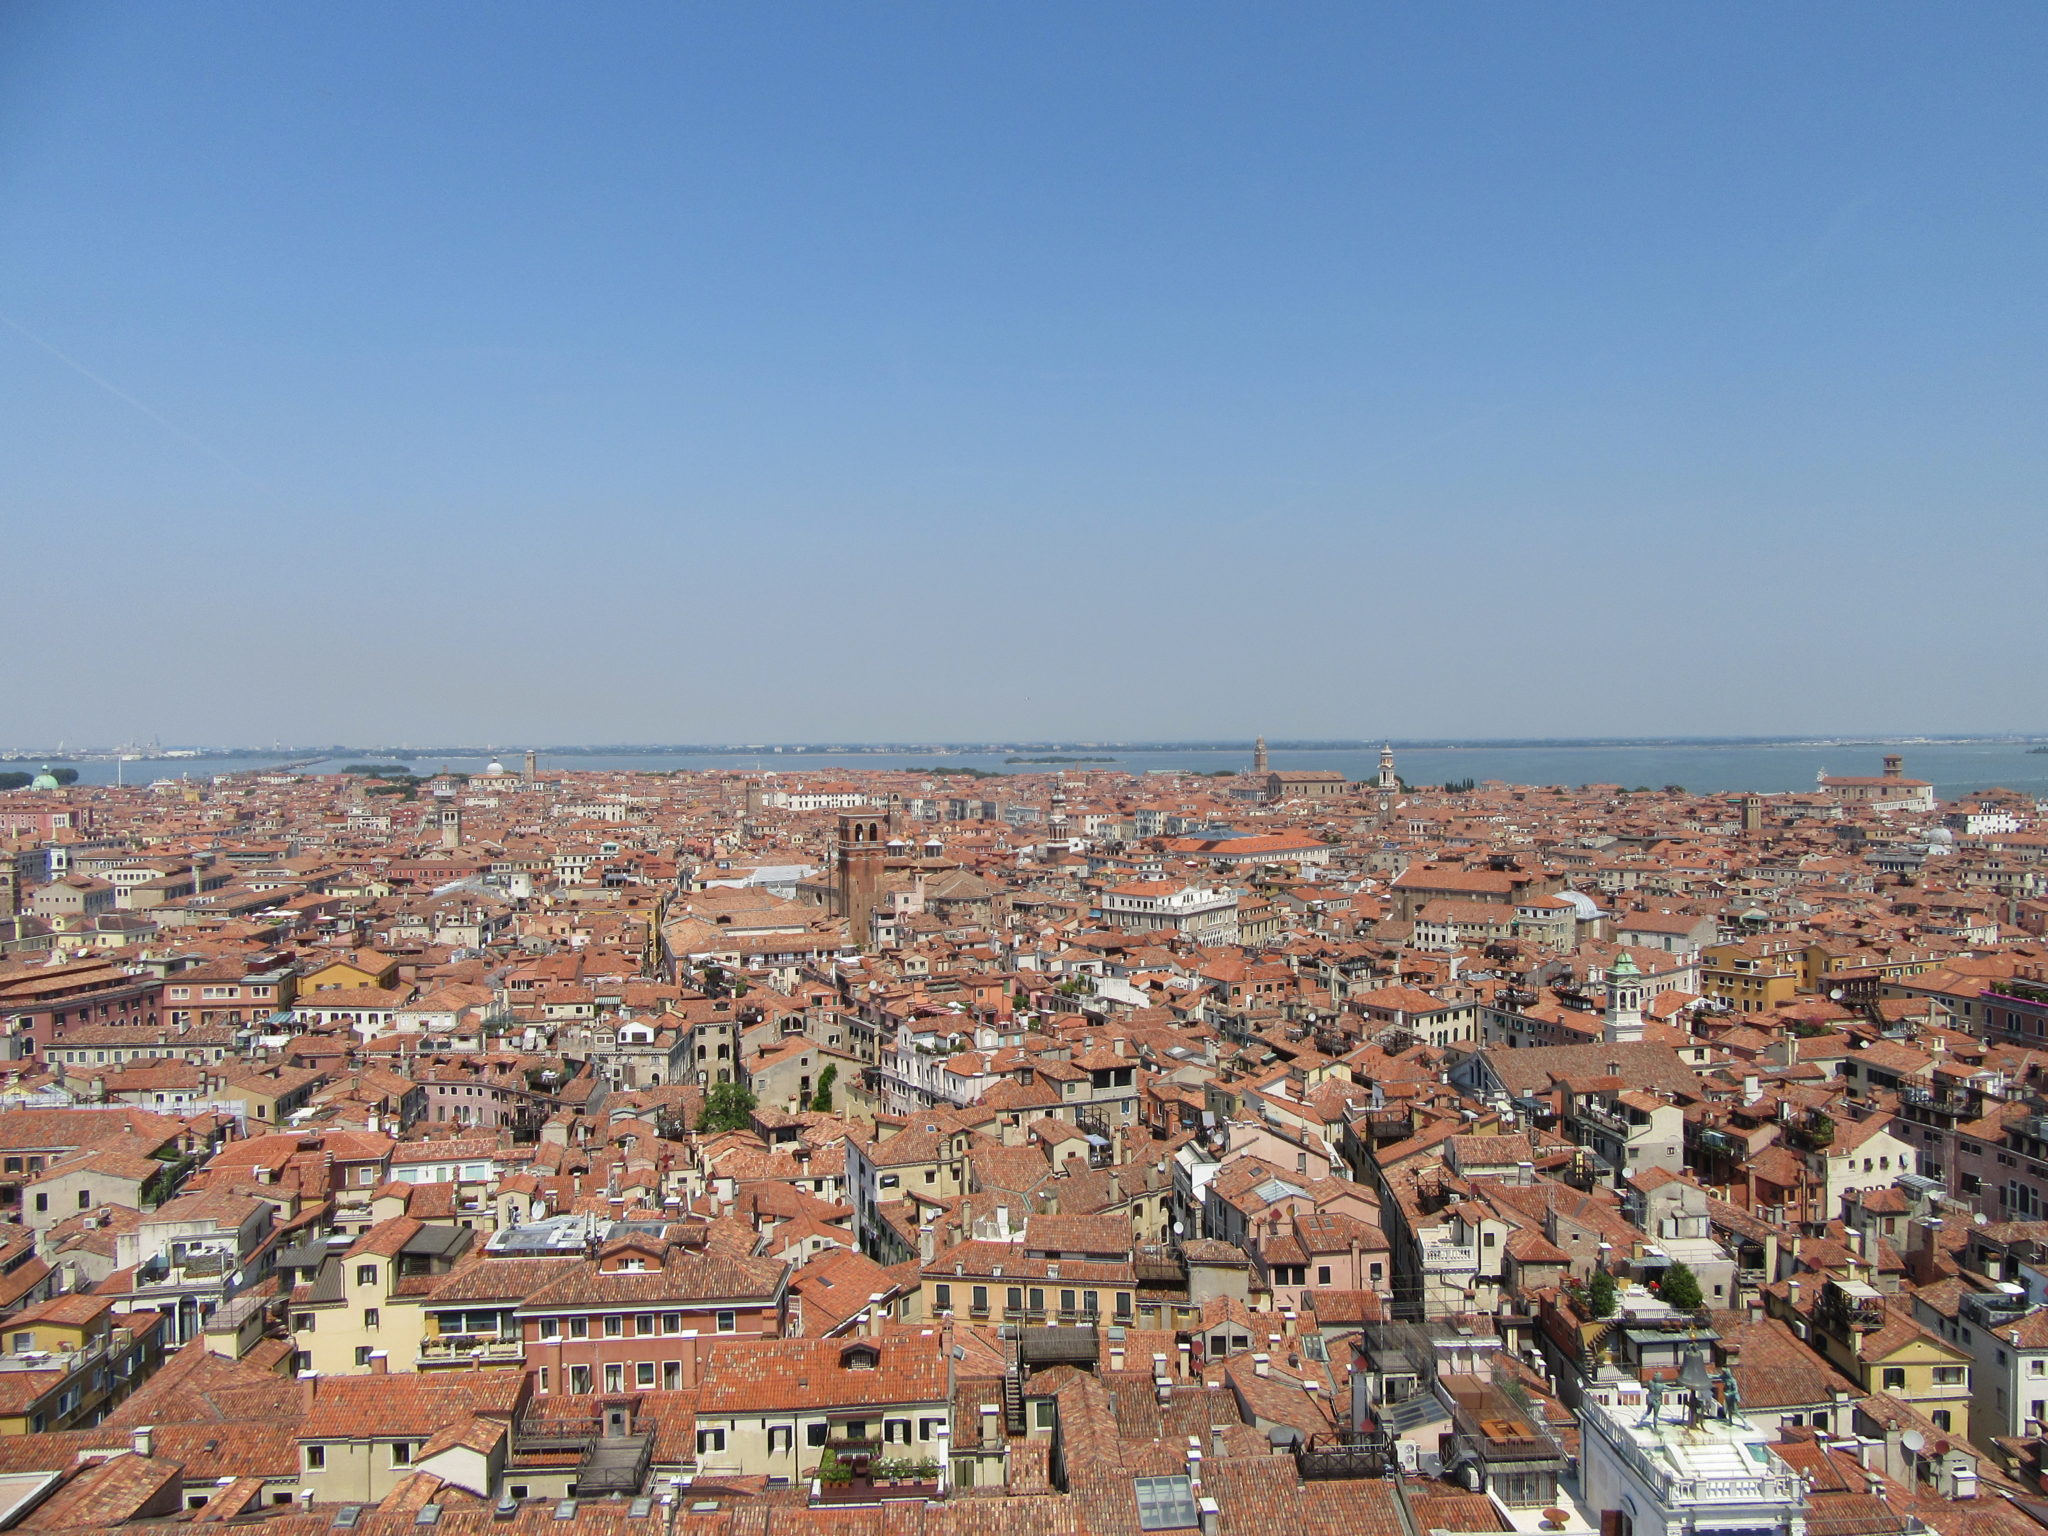 The View from Saint Mark's Bell Tower